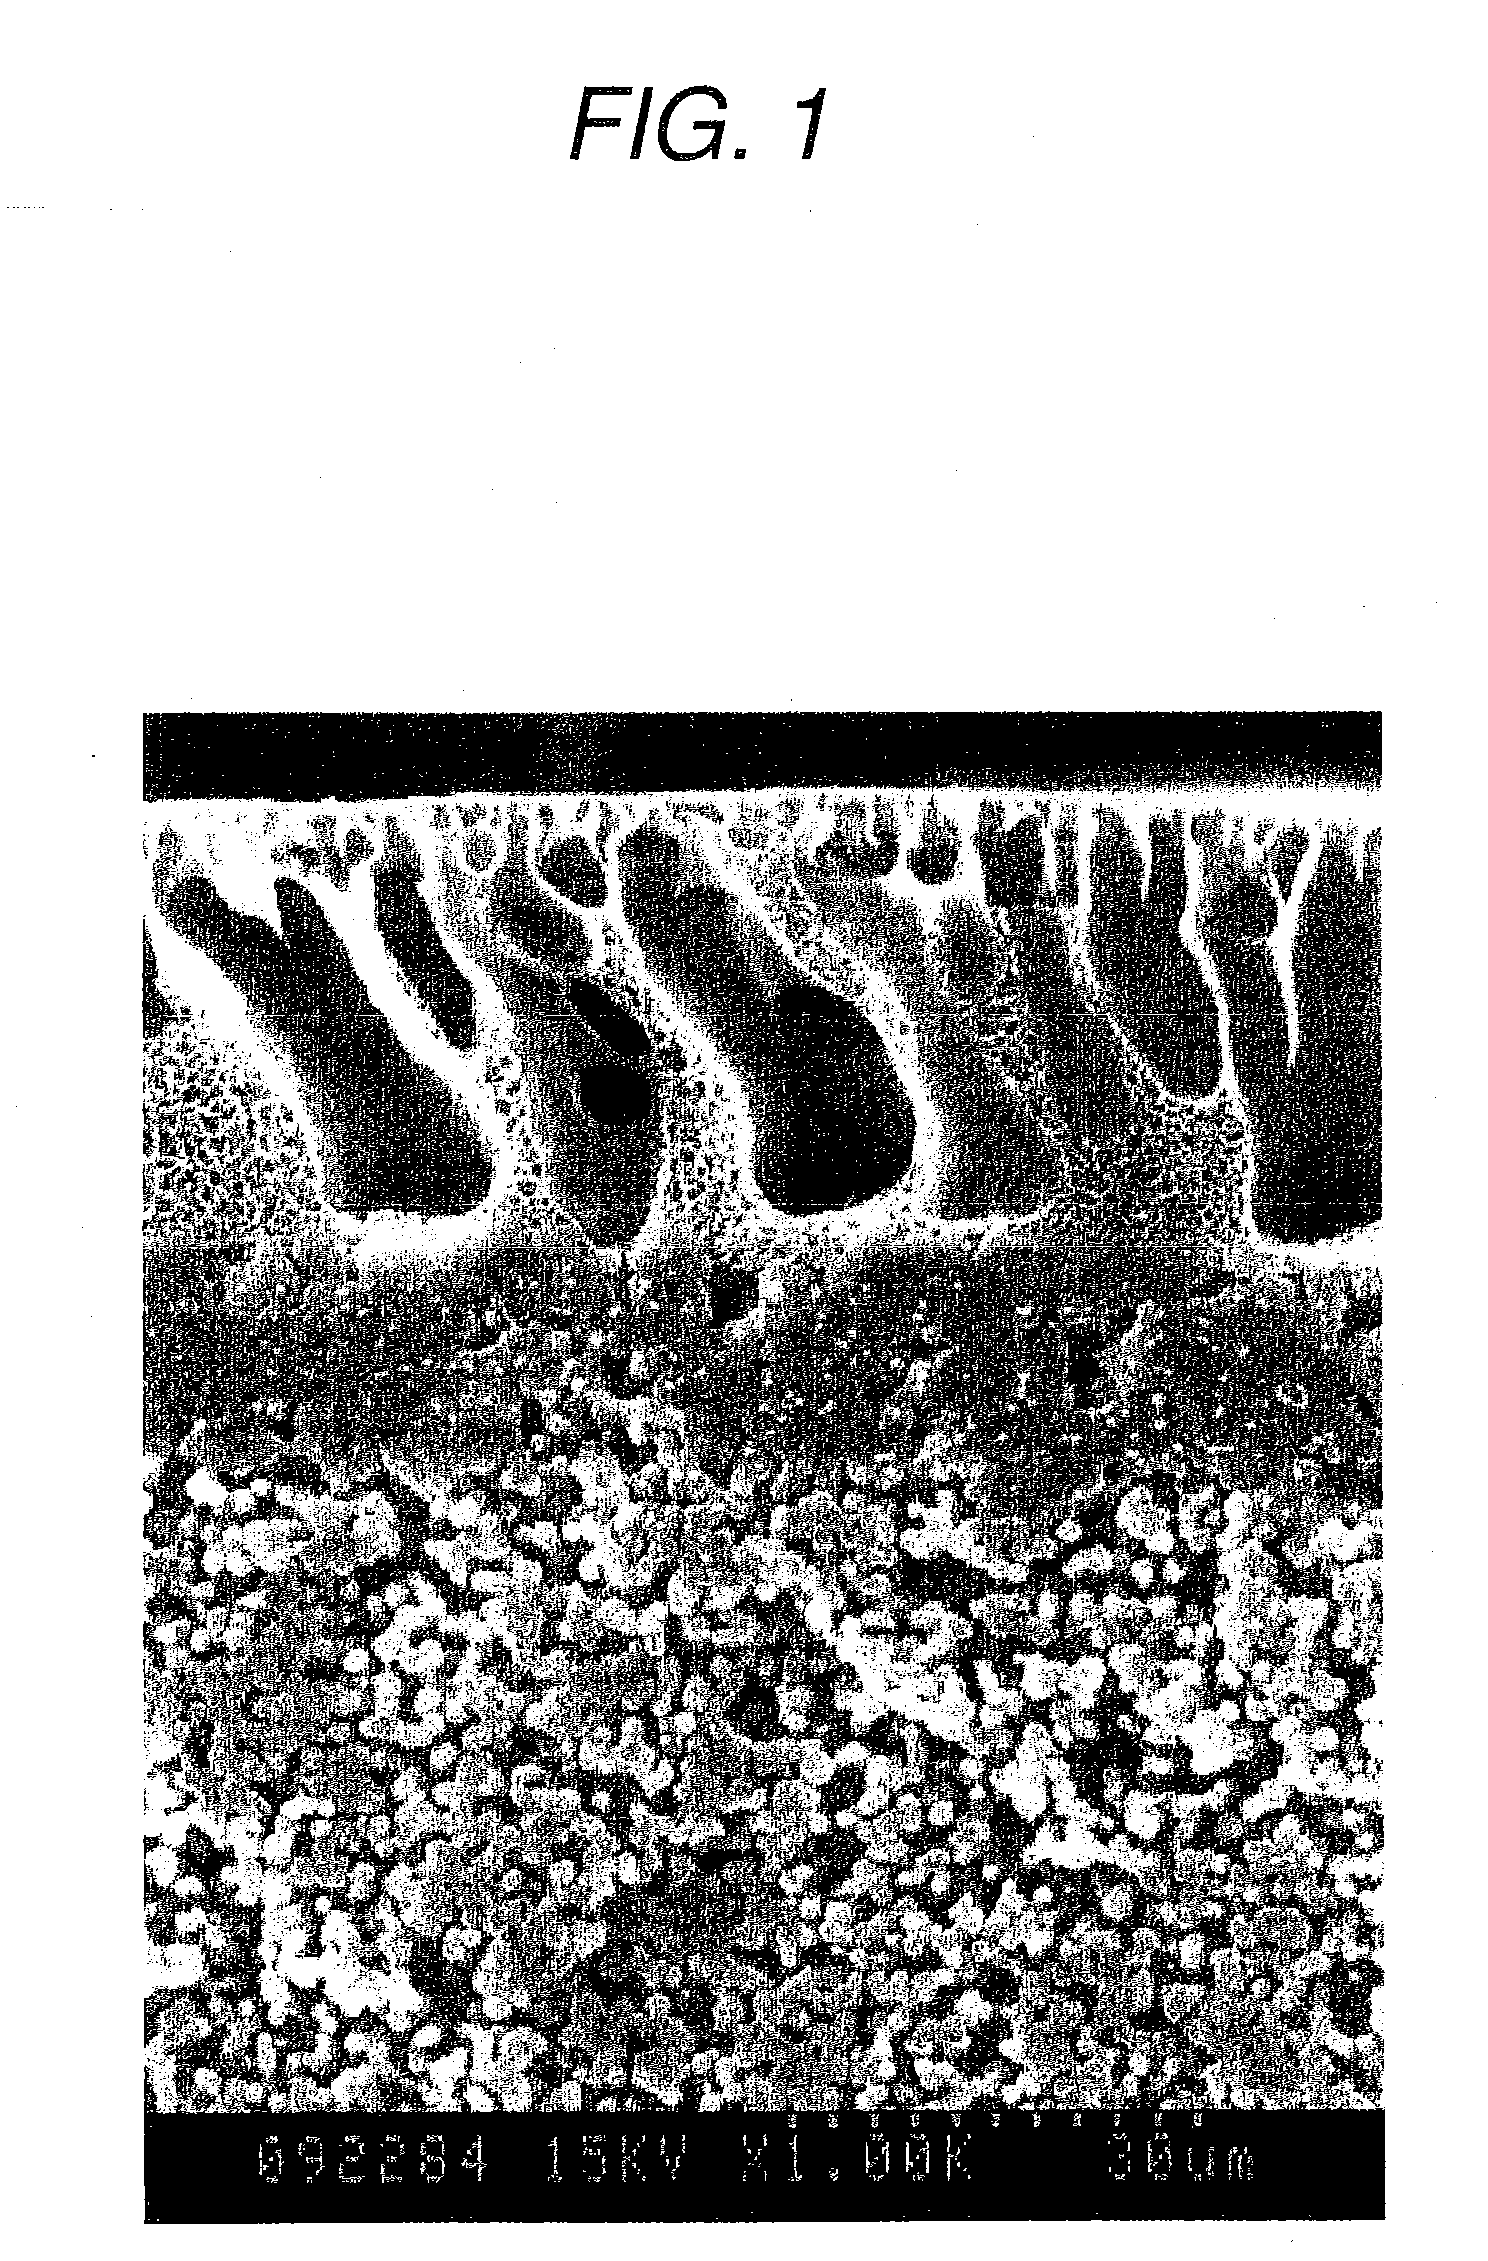 Polymer separation membrane and process for producing the same